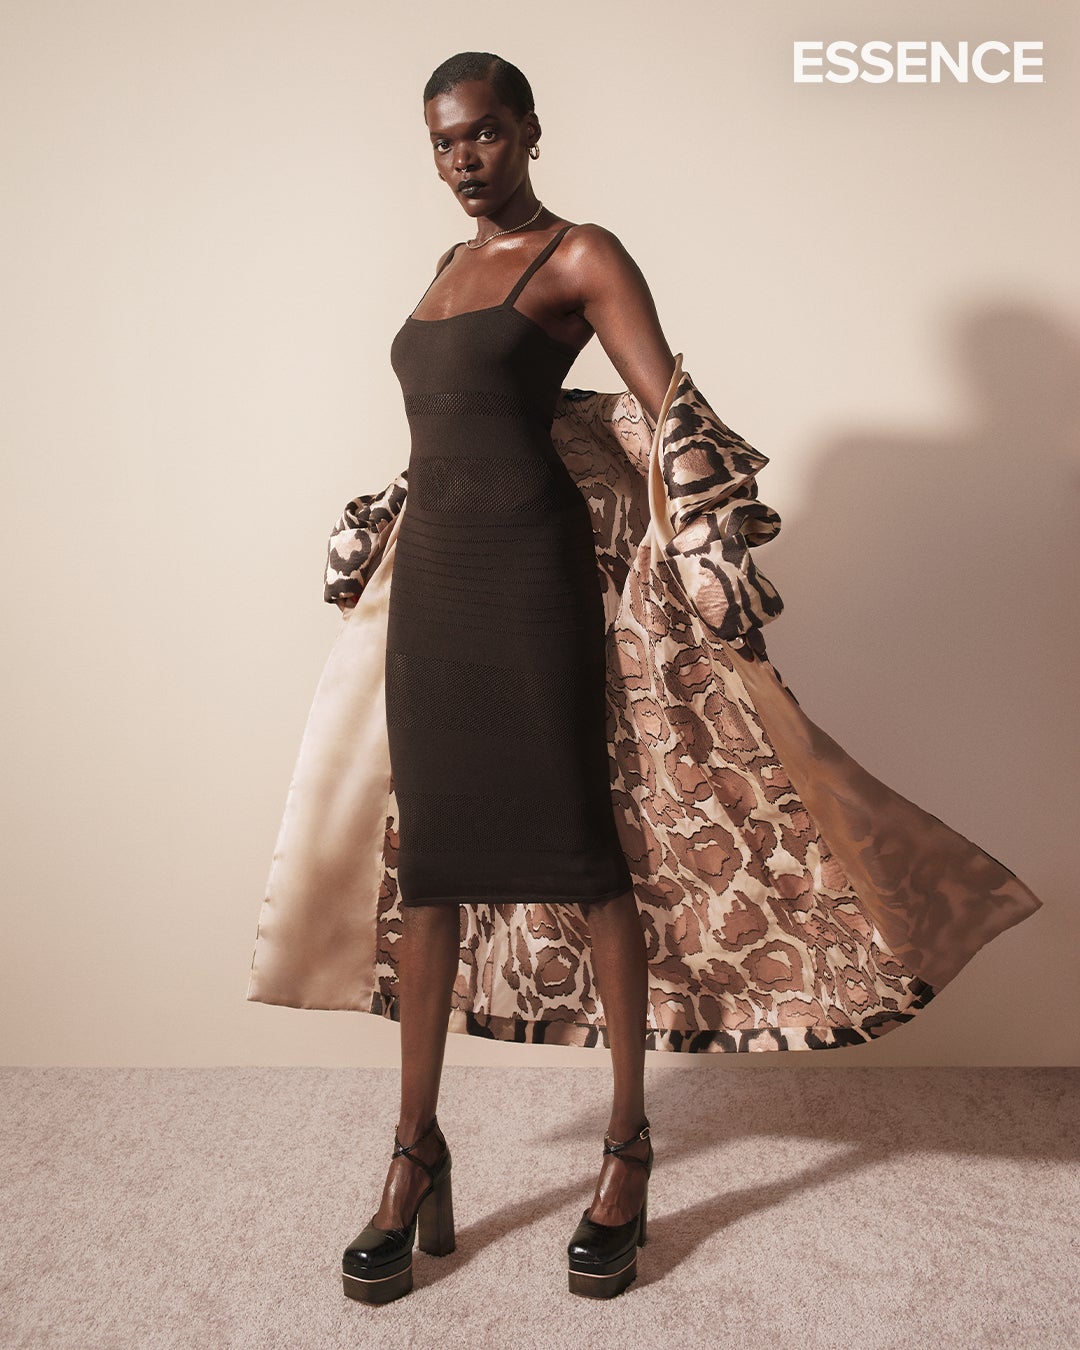 Predestined: How A Medical School Rejection Put Sheila Atim On The Path To Movie Stardom